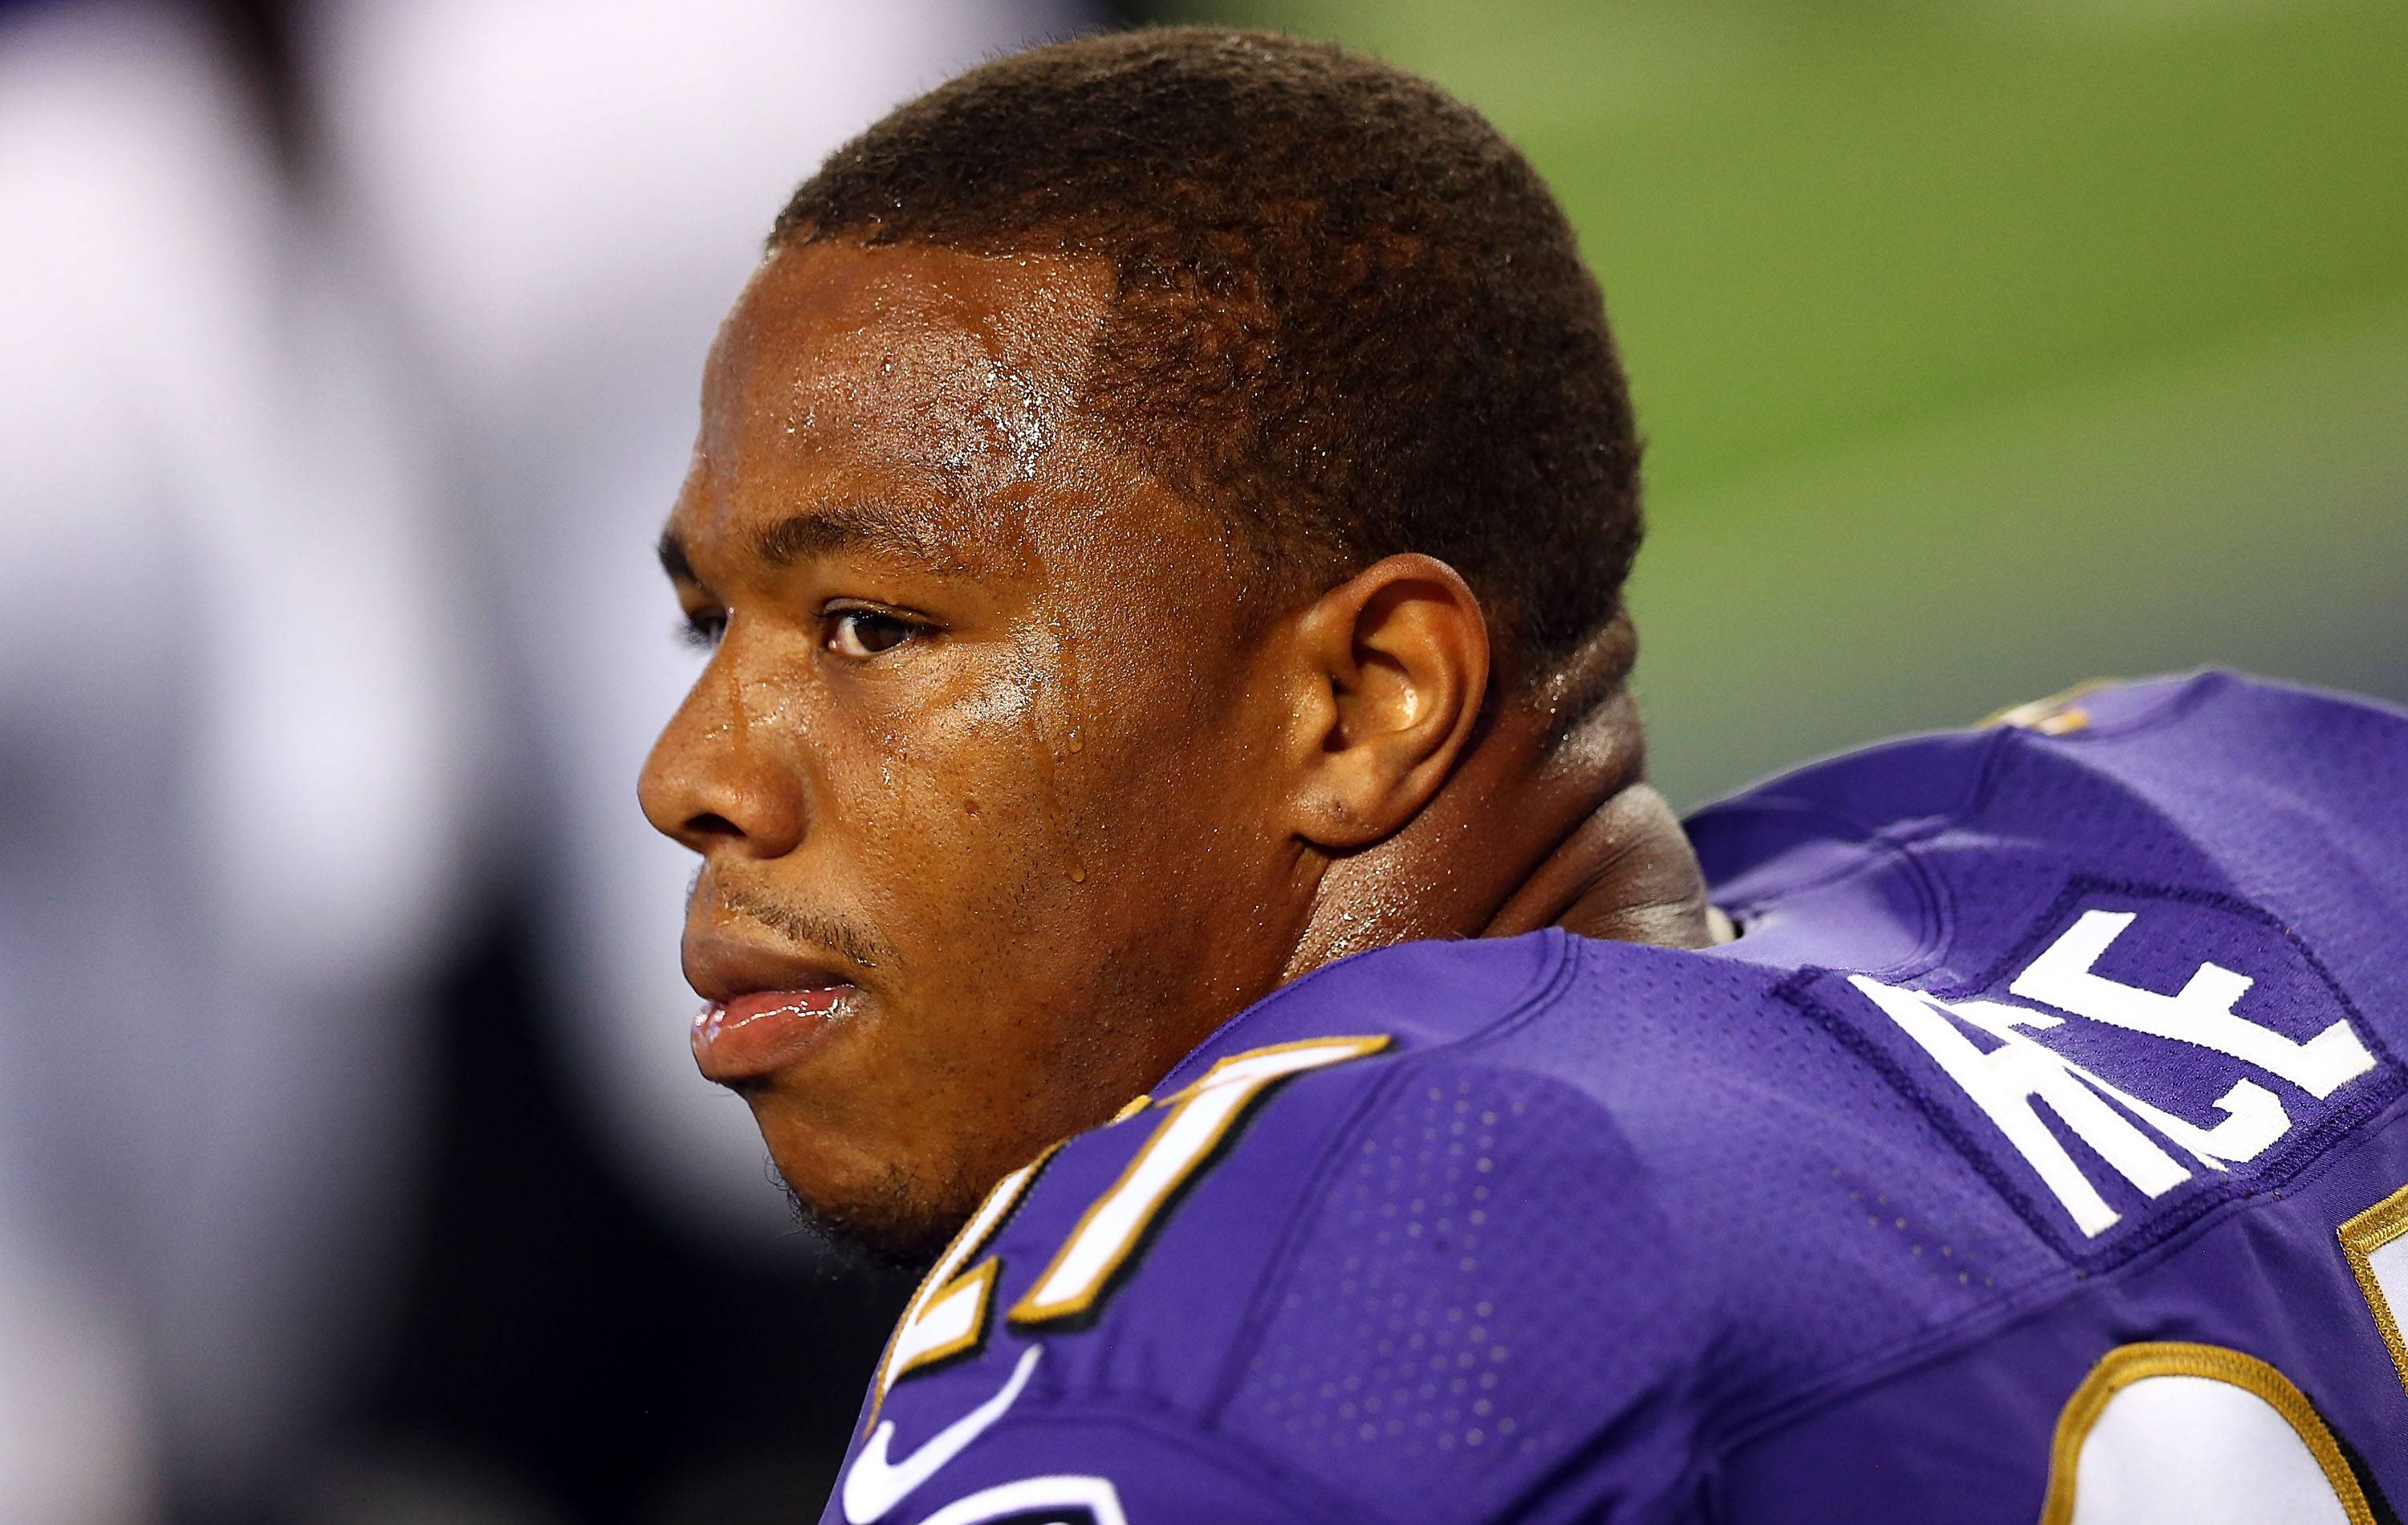 Ray Rice #27 of the Baltimore Ravens sits on the bench against the Dallas Cowboys in the first half of their preseason game at AT&T Stadium on August 16, 2014 in Arlington, Texas.